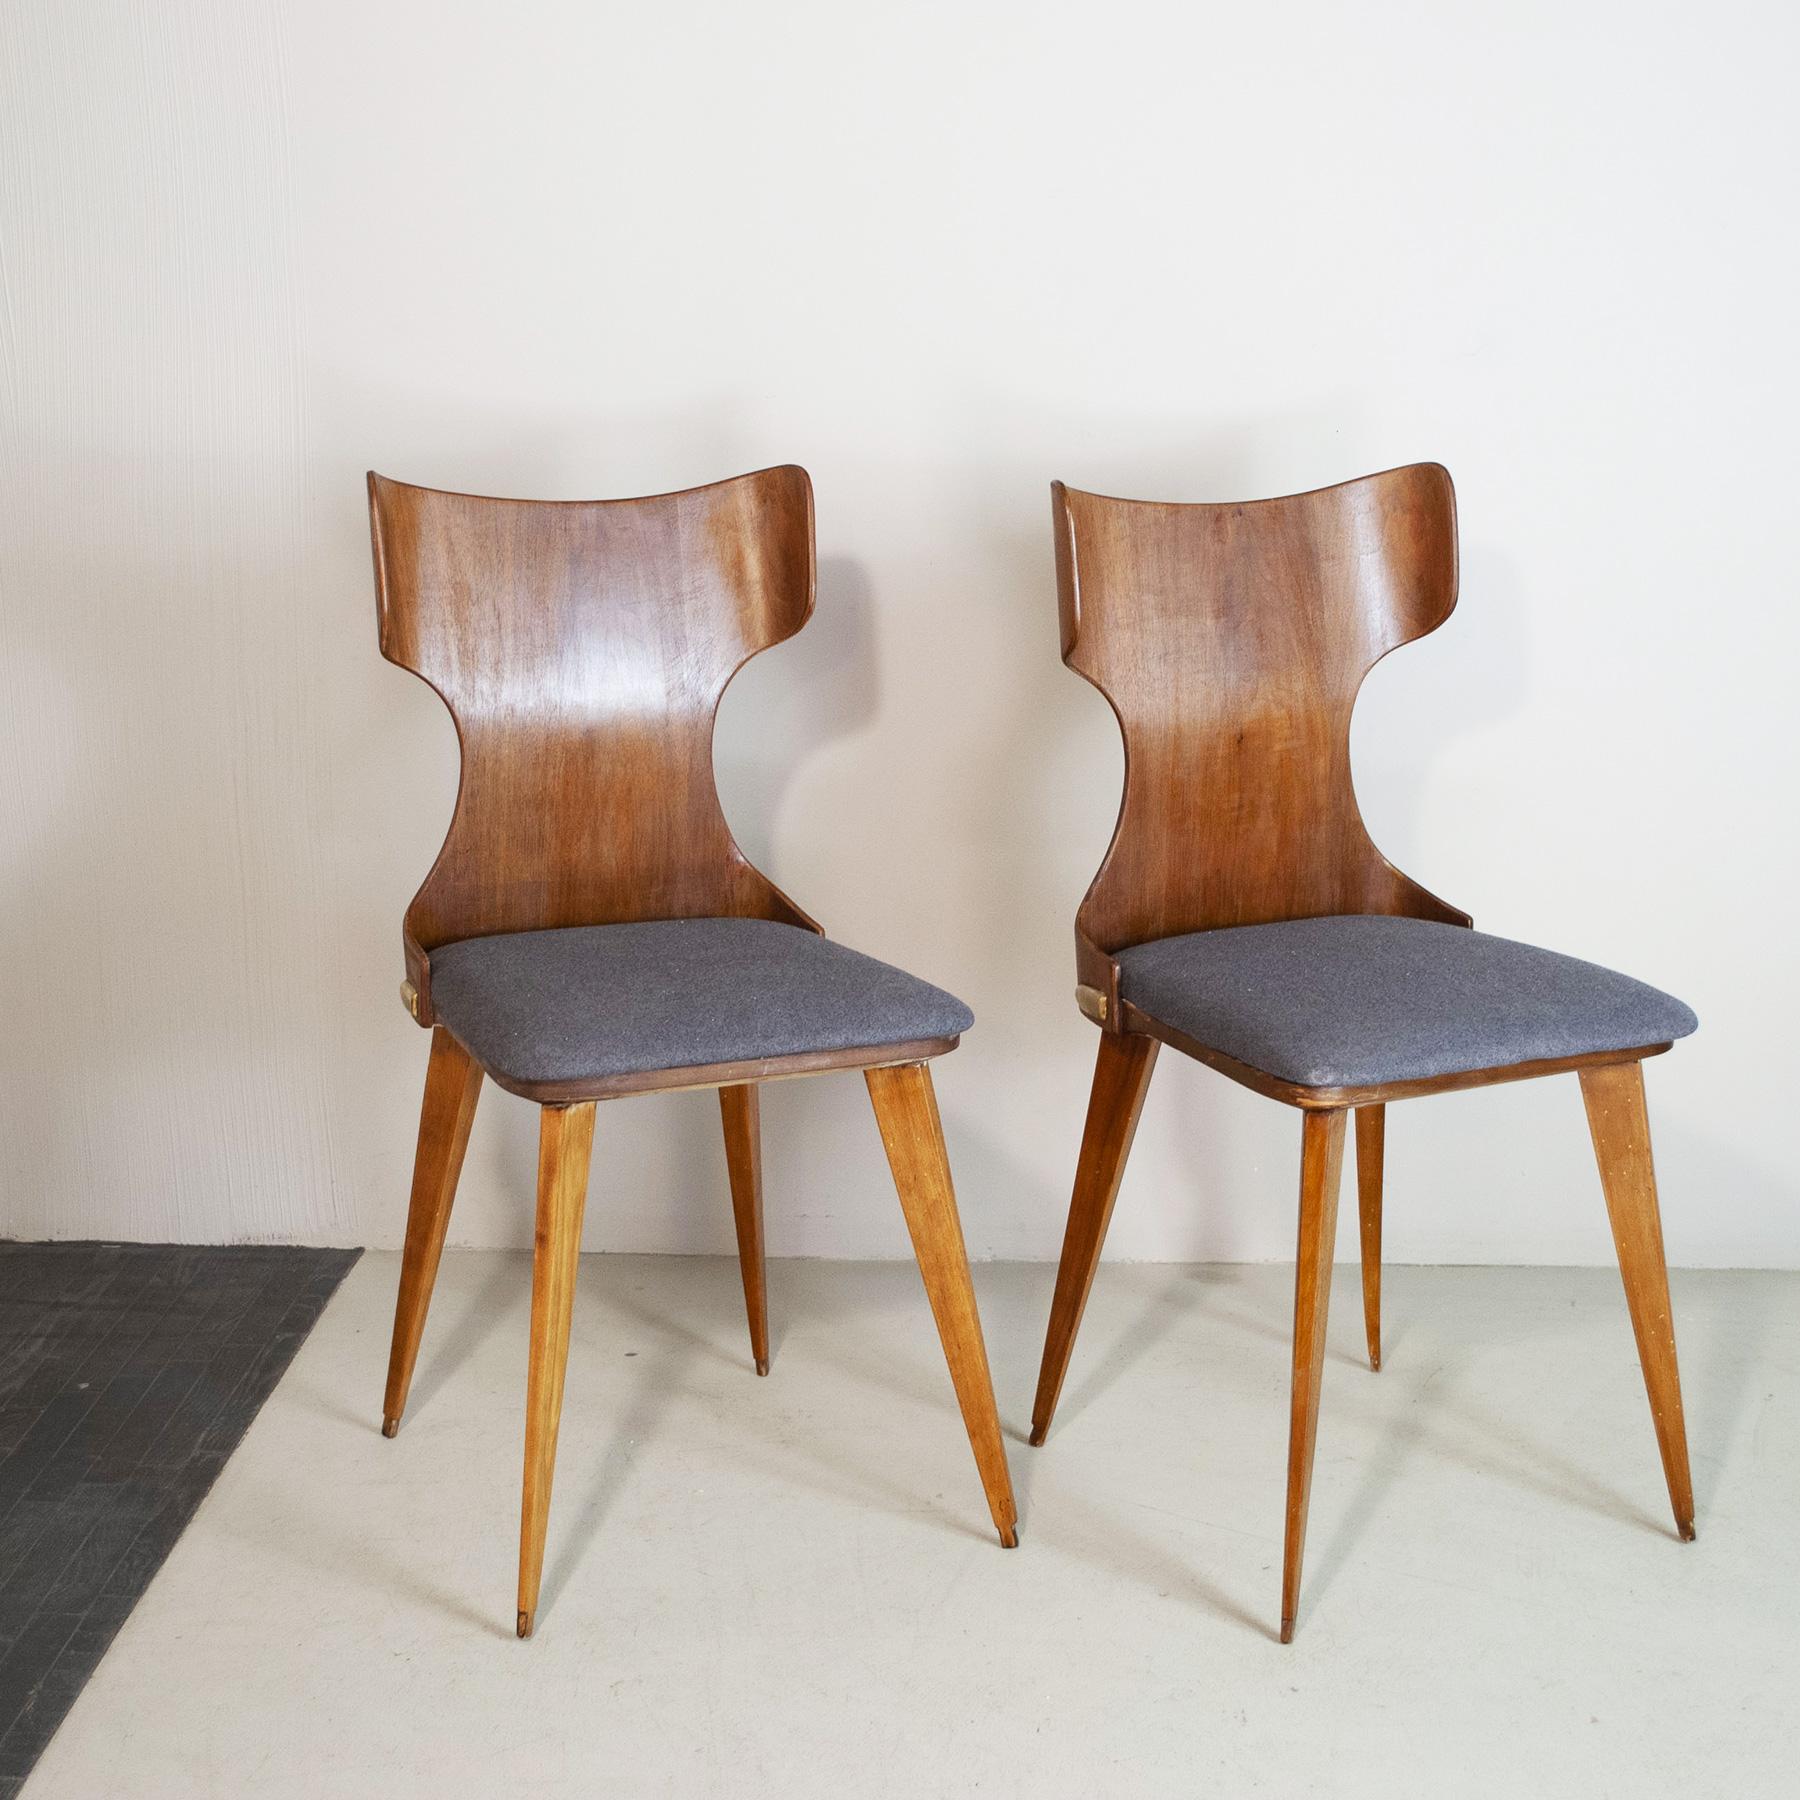 Wood Carlo Ratti Italian Midcentury Chairs Form the Fifties For Sale